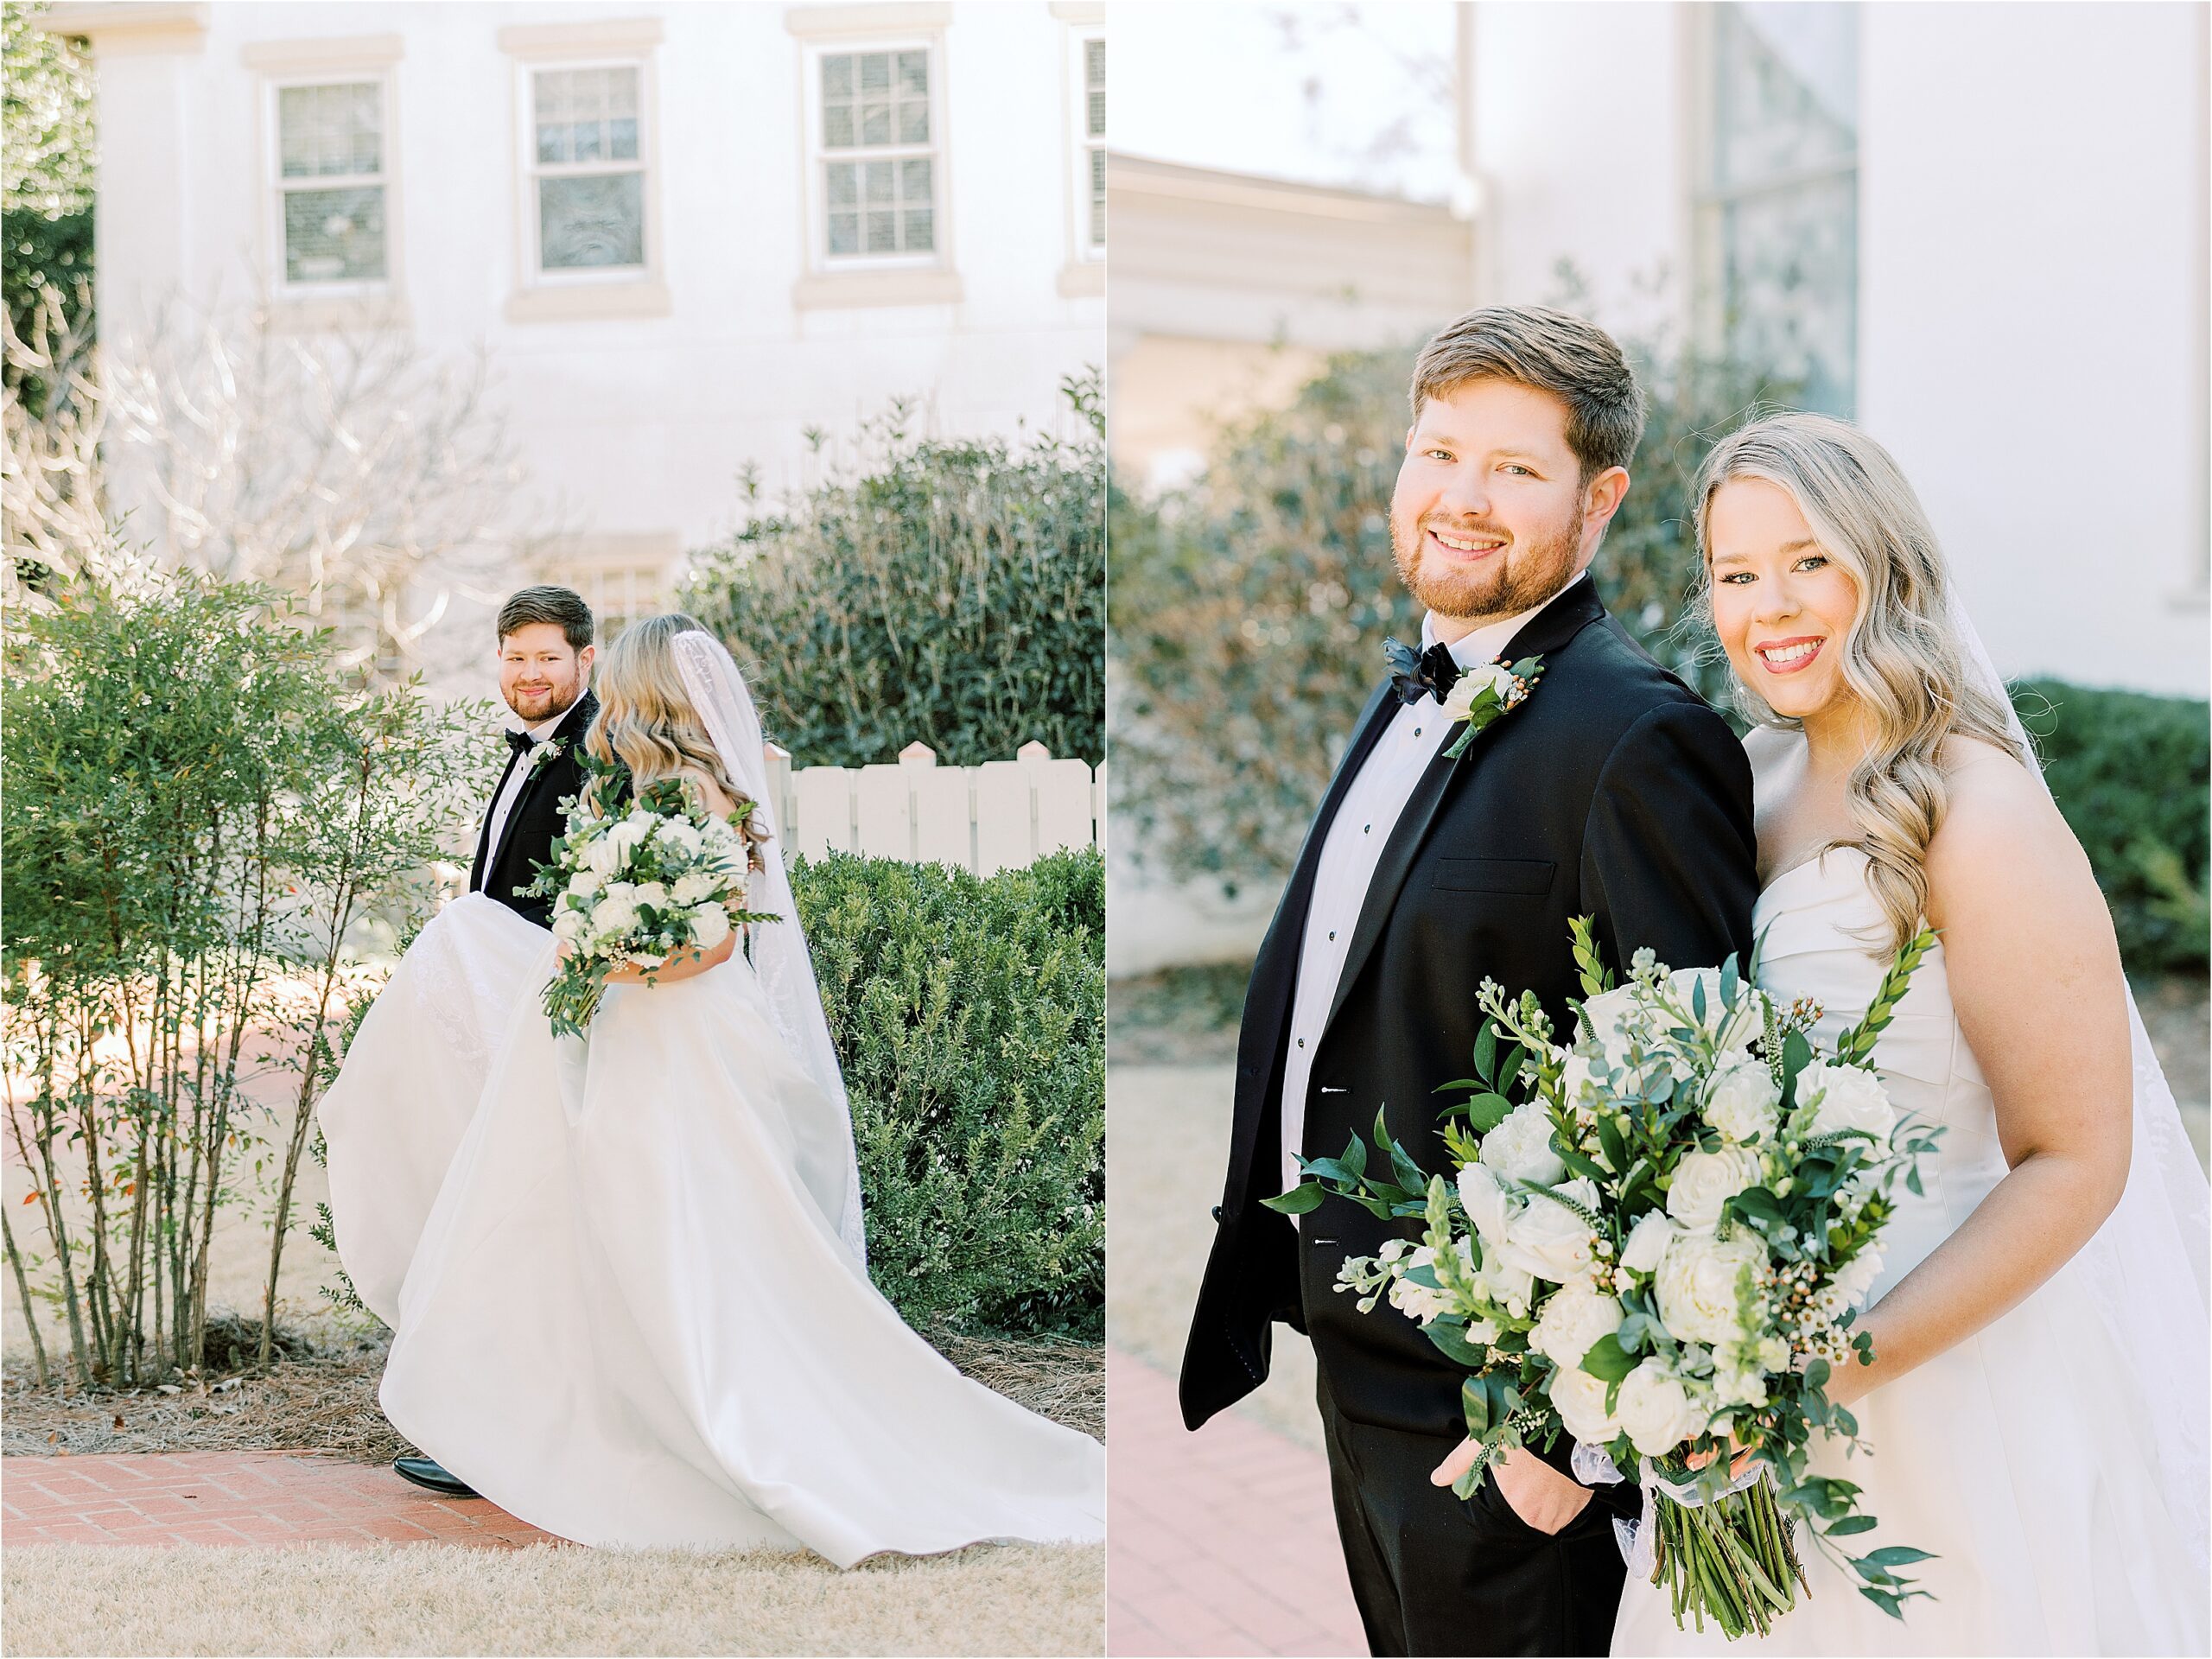 Bride in a white dress while holding flowers, and the groom in a black tuxedo walking in front of a white church.